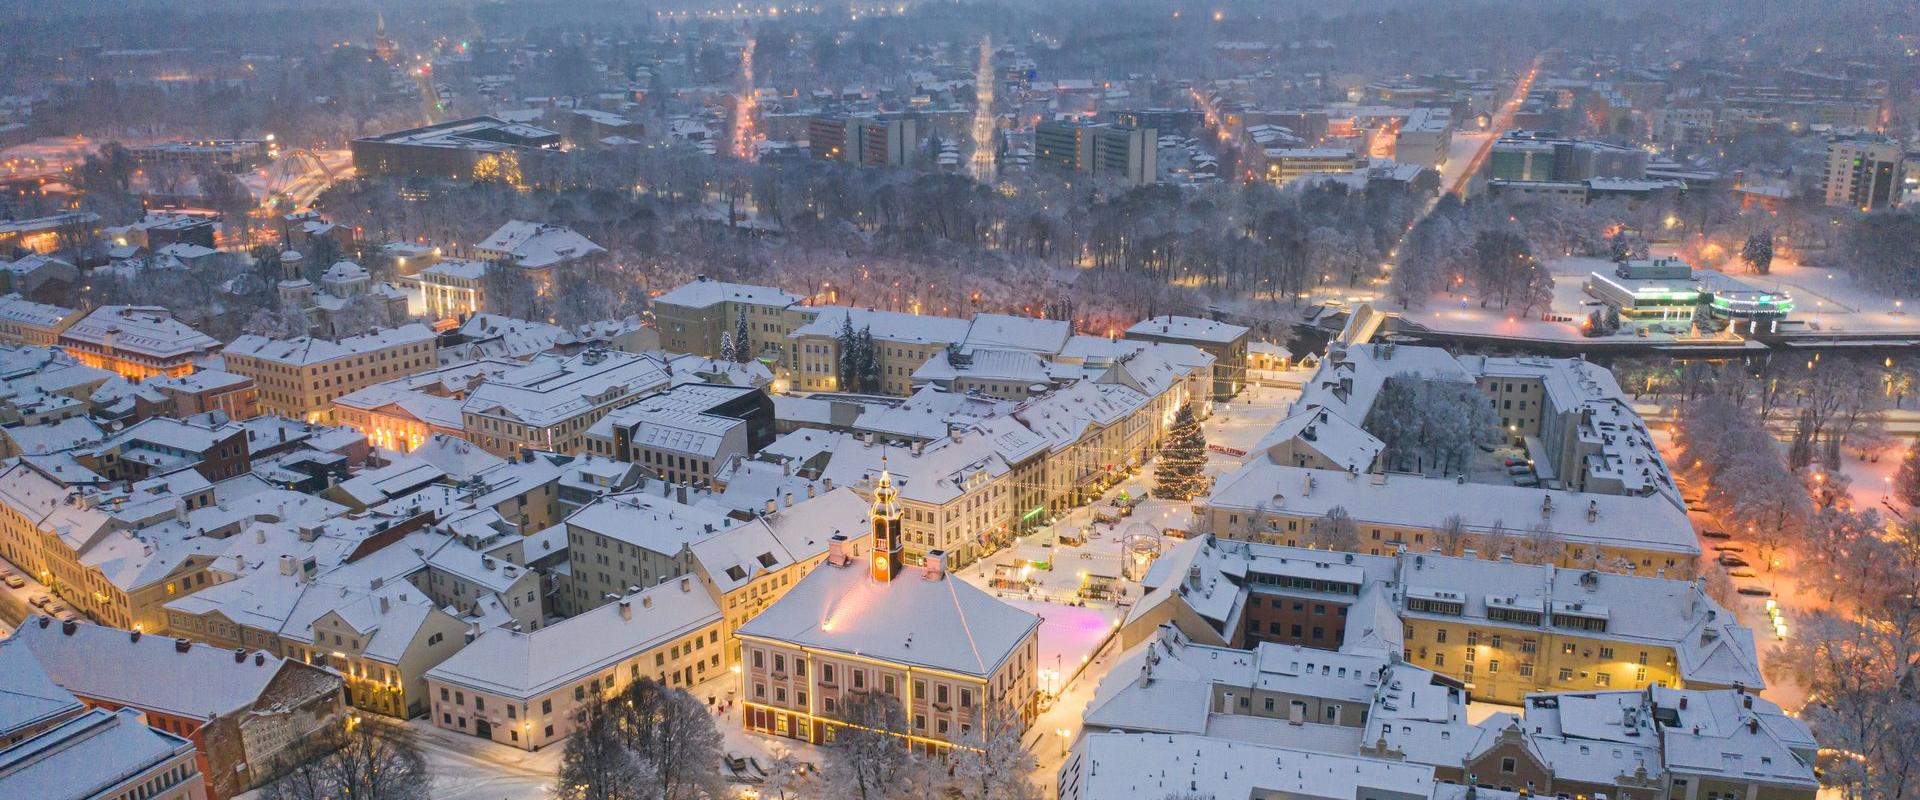 View of the Arch Bridge and snowy roofs in Tartu in the evening